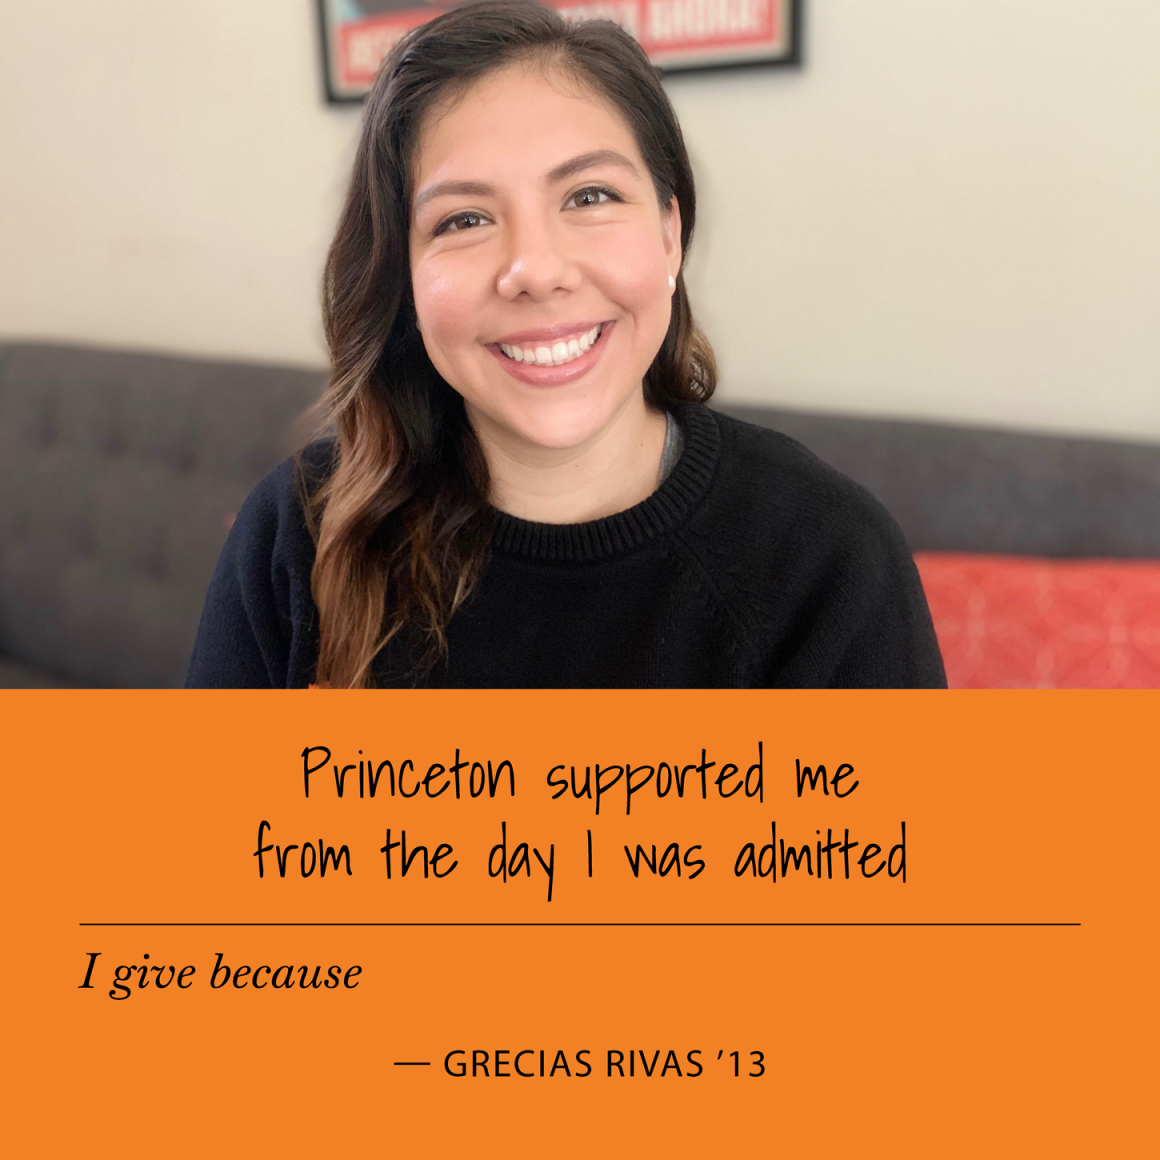 "I give because Princeton supported me from the day I was admitted." Grecias Rivas '13